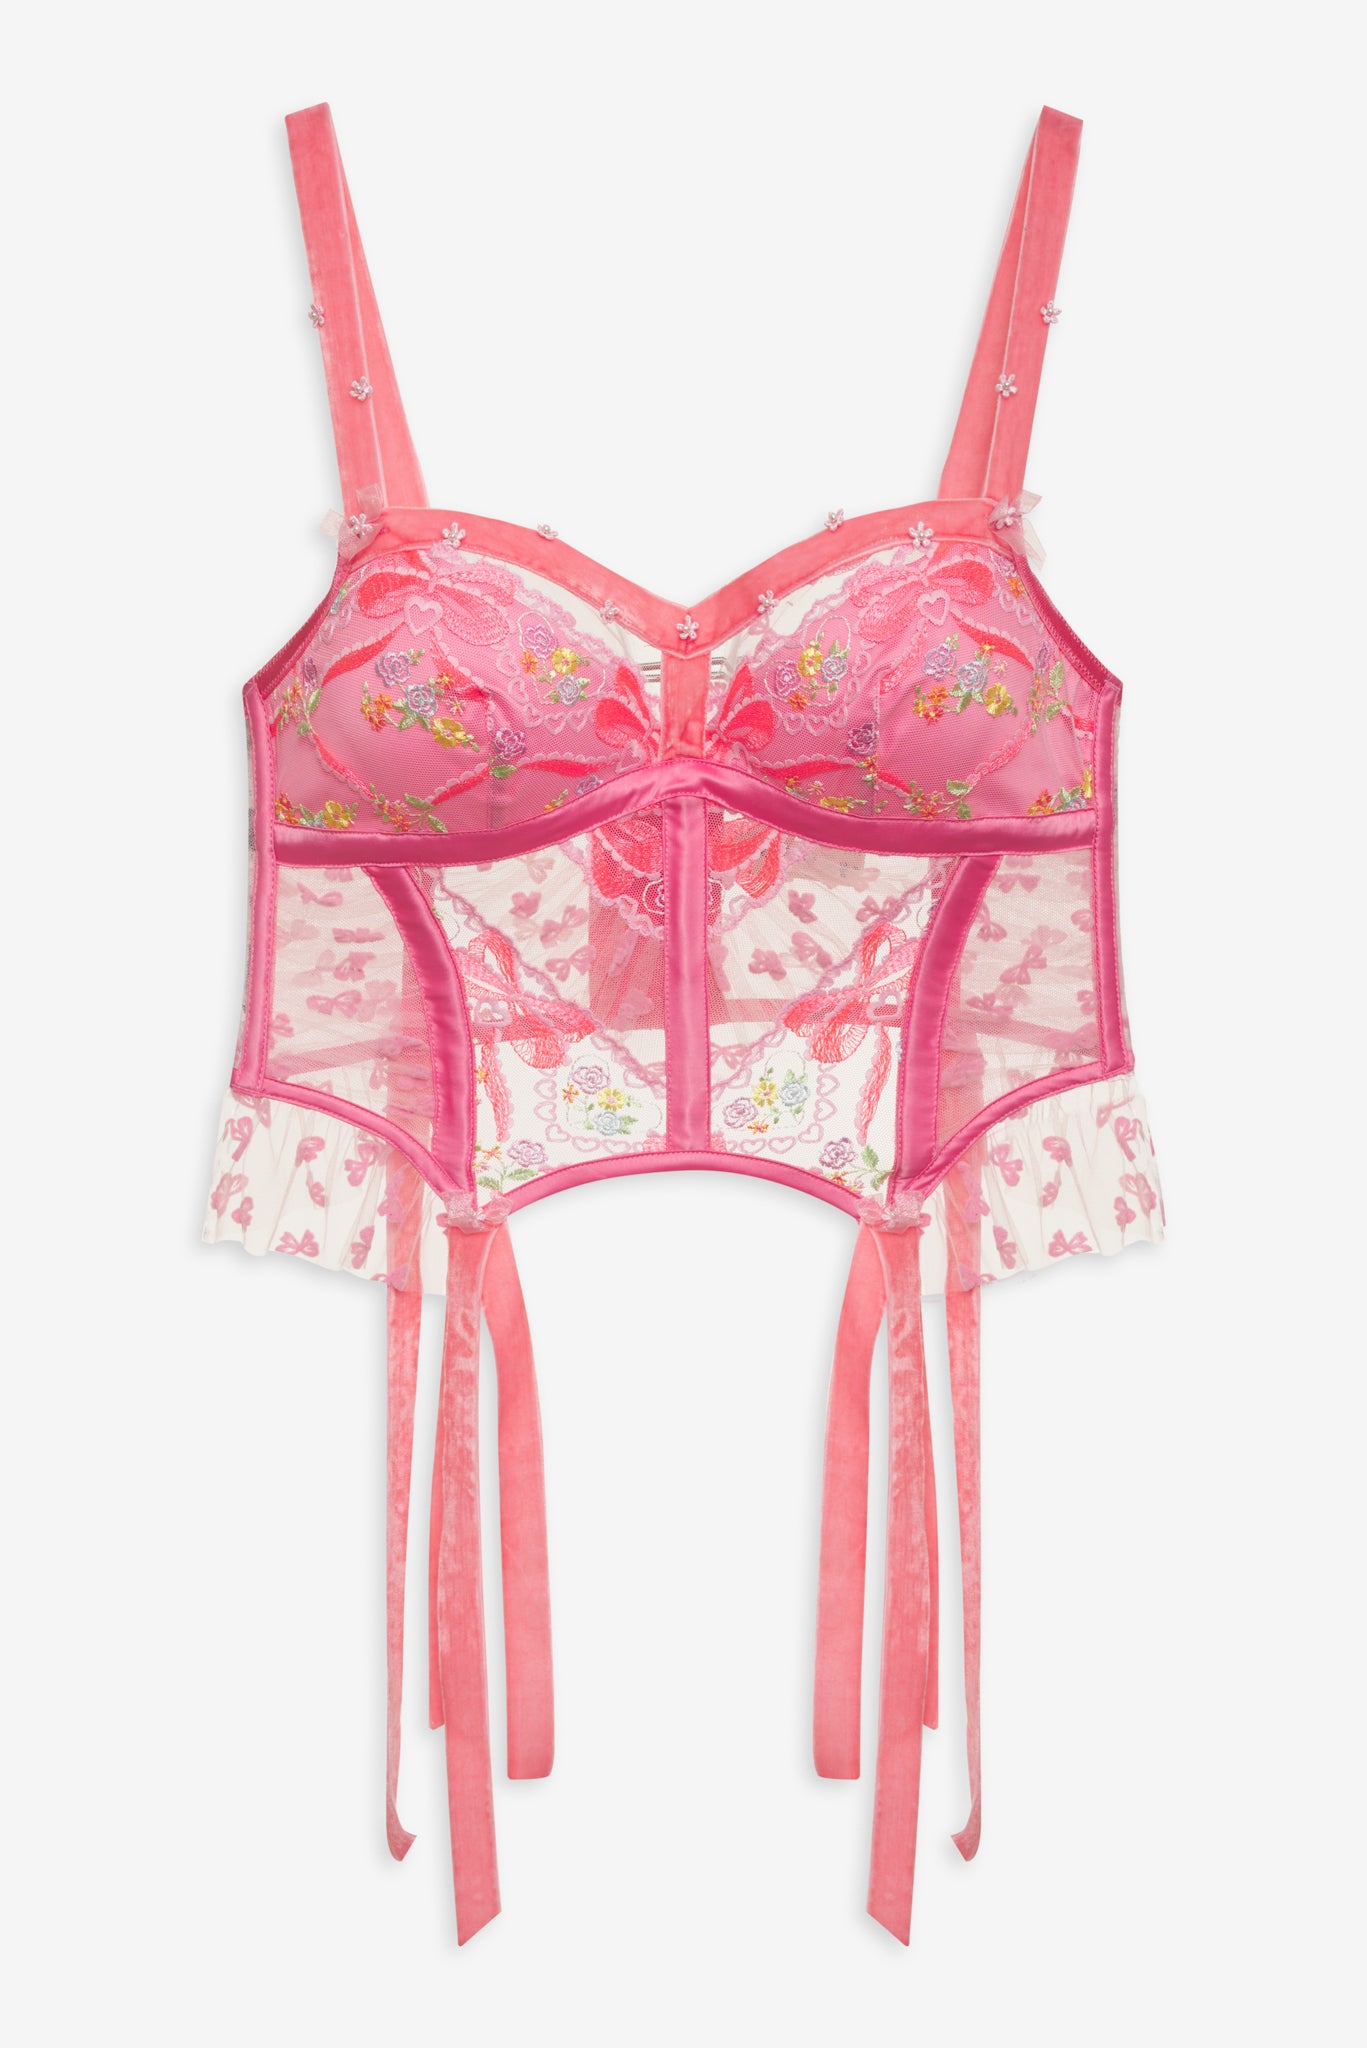 For Love & Lemons Floral Corset Top  Urban Outfitters New Zealand -  Clothing, Music, Home & Accessories